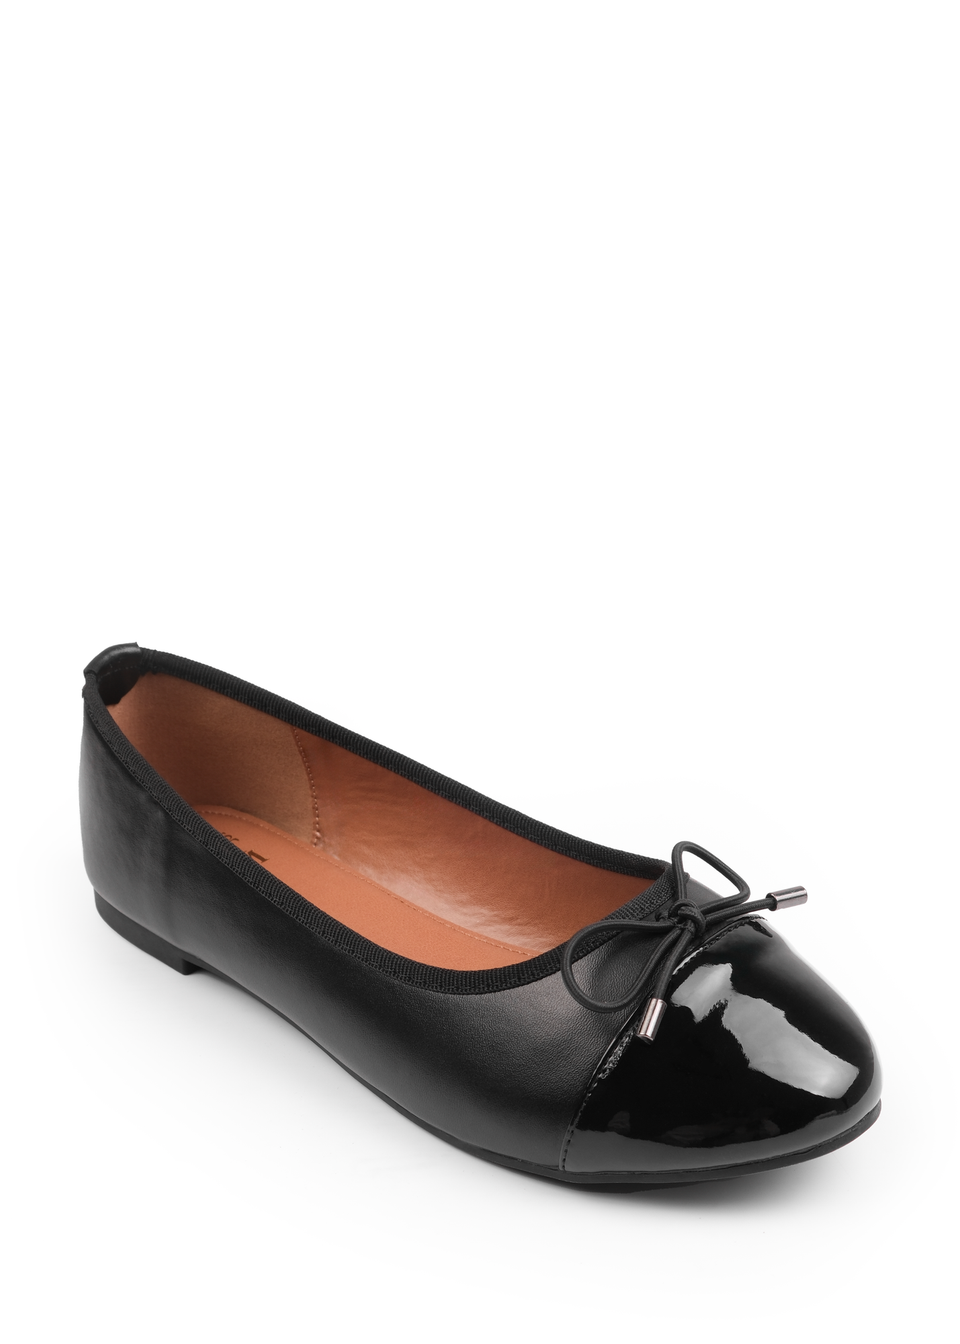 Where's That From Black Janice Extra Wide PU Ballerina Flats